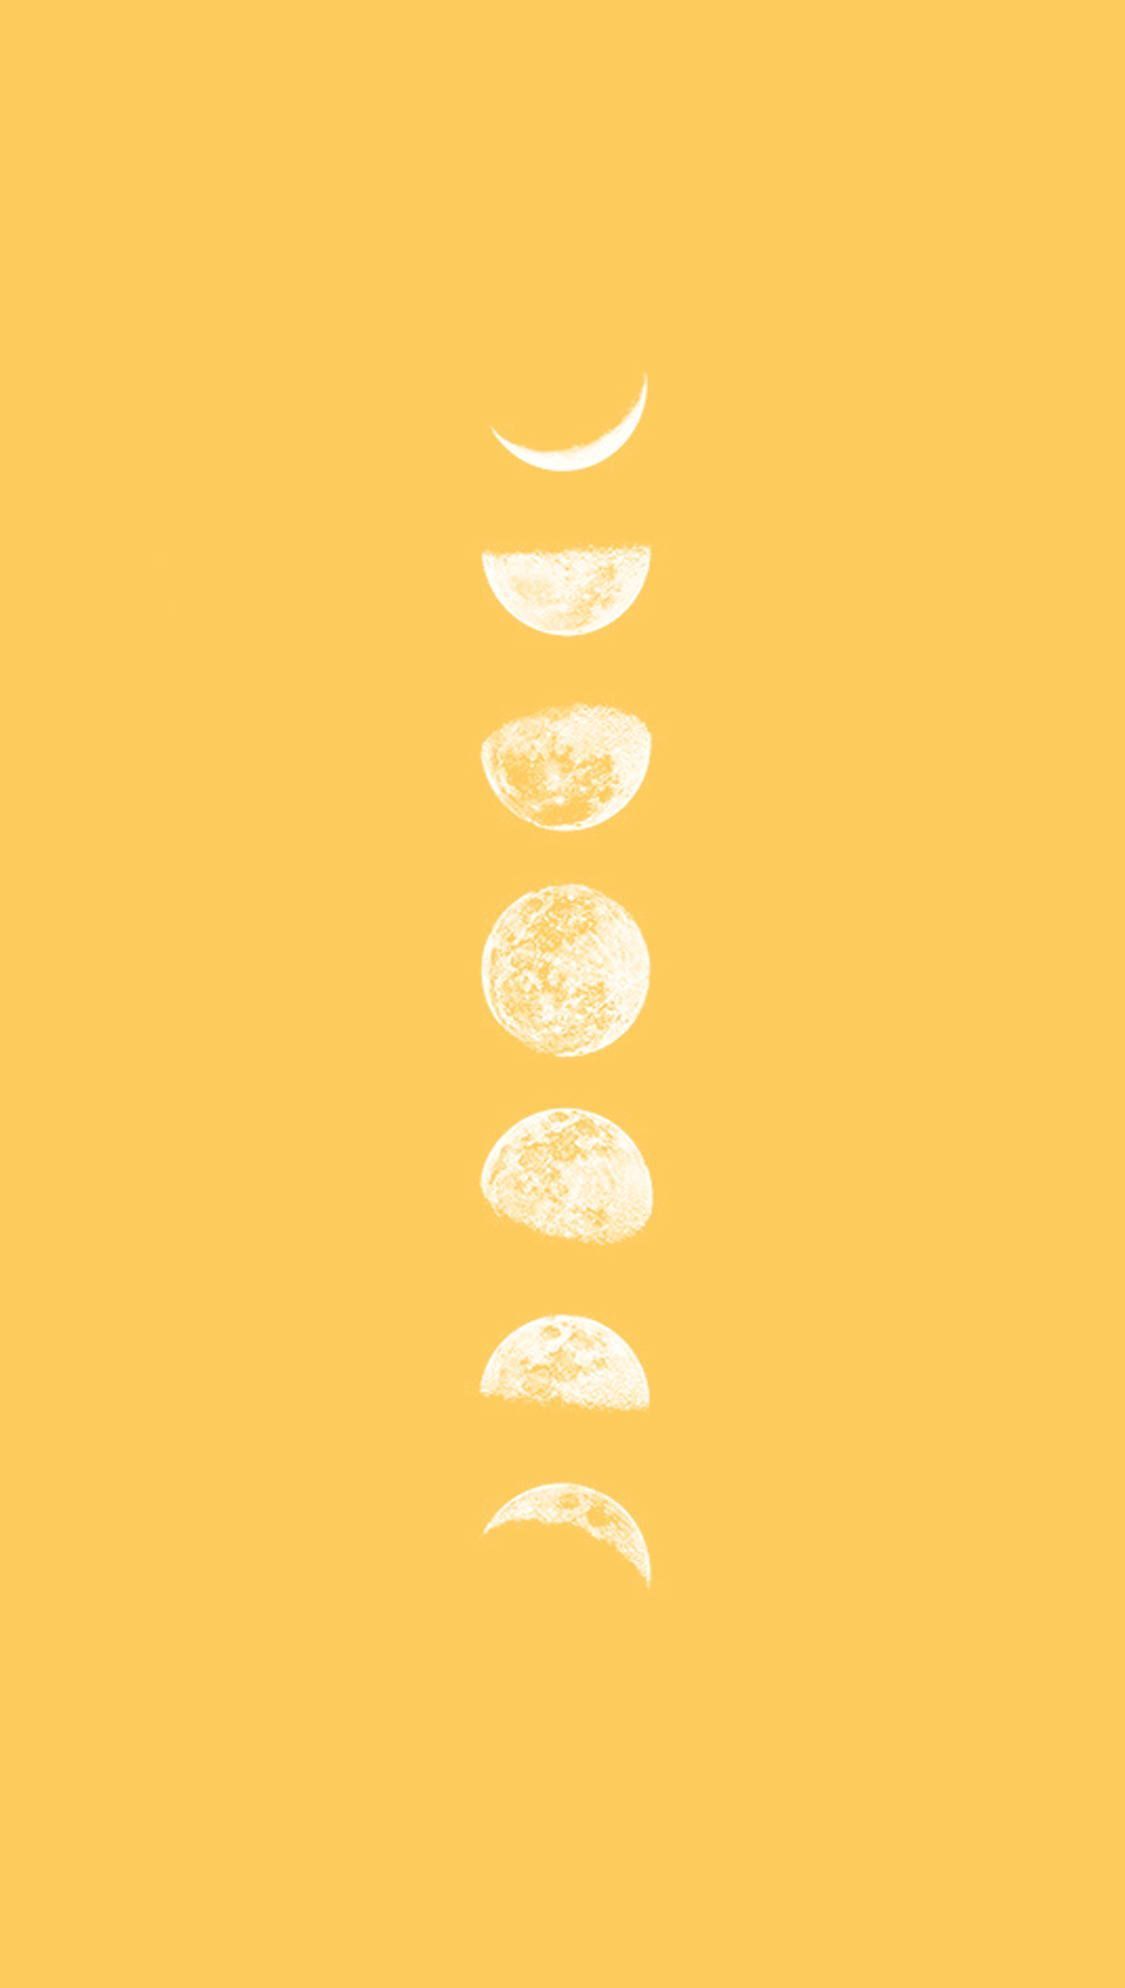 A yellow wallpaper with the different moon phases - Yellow, pastel yellow, May